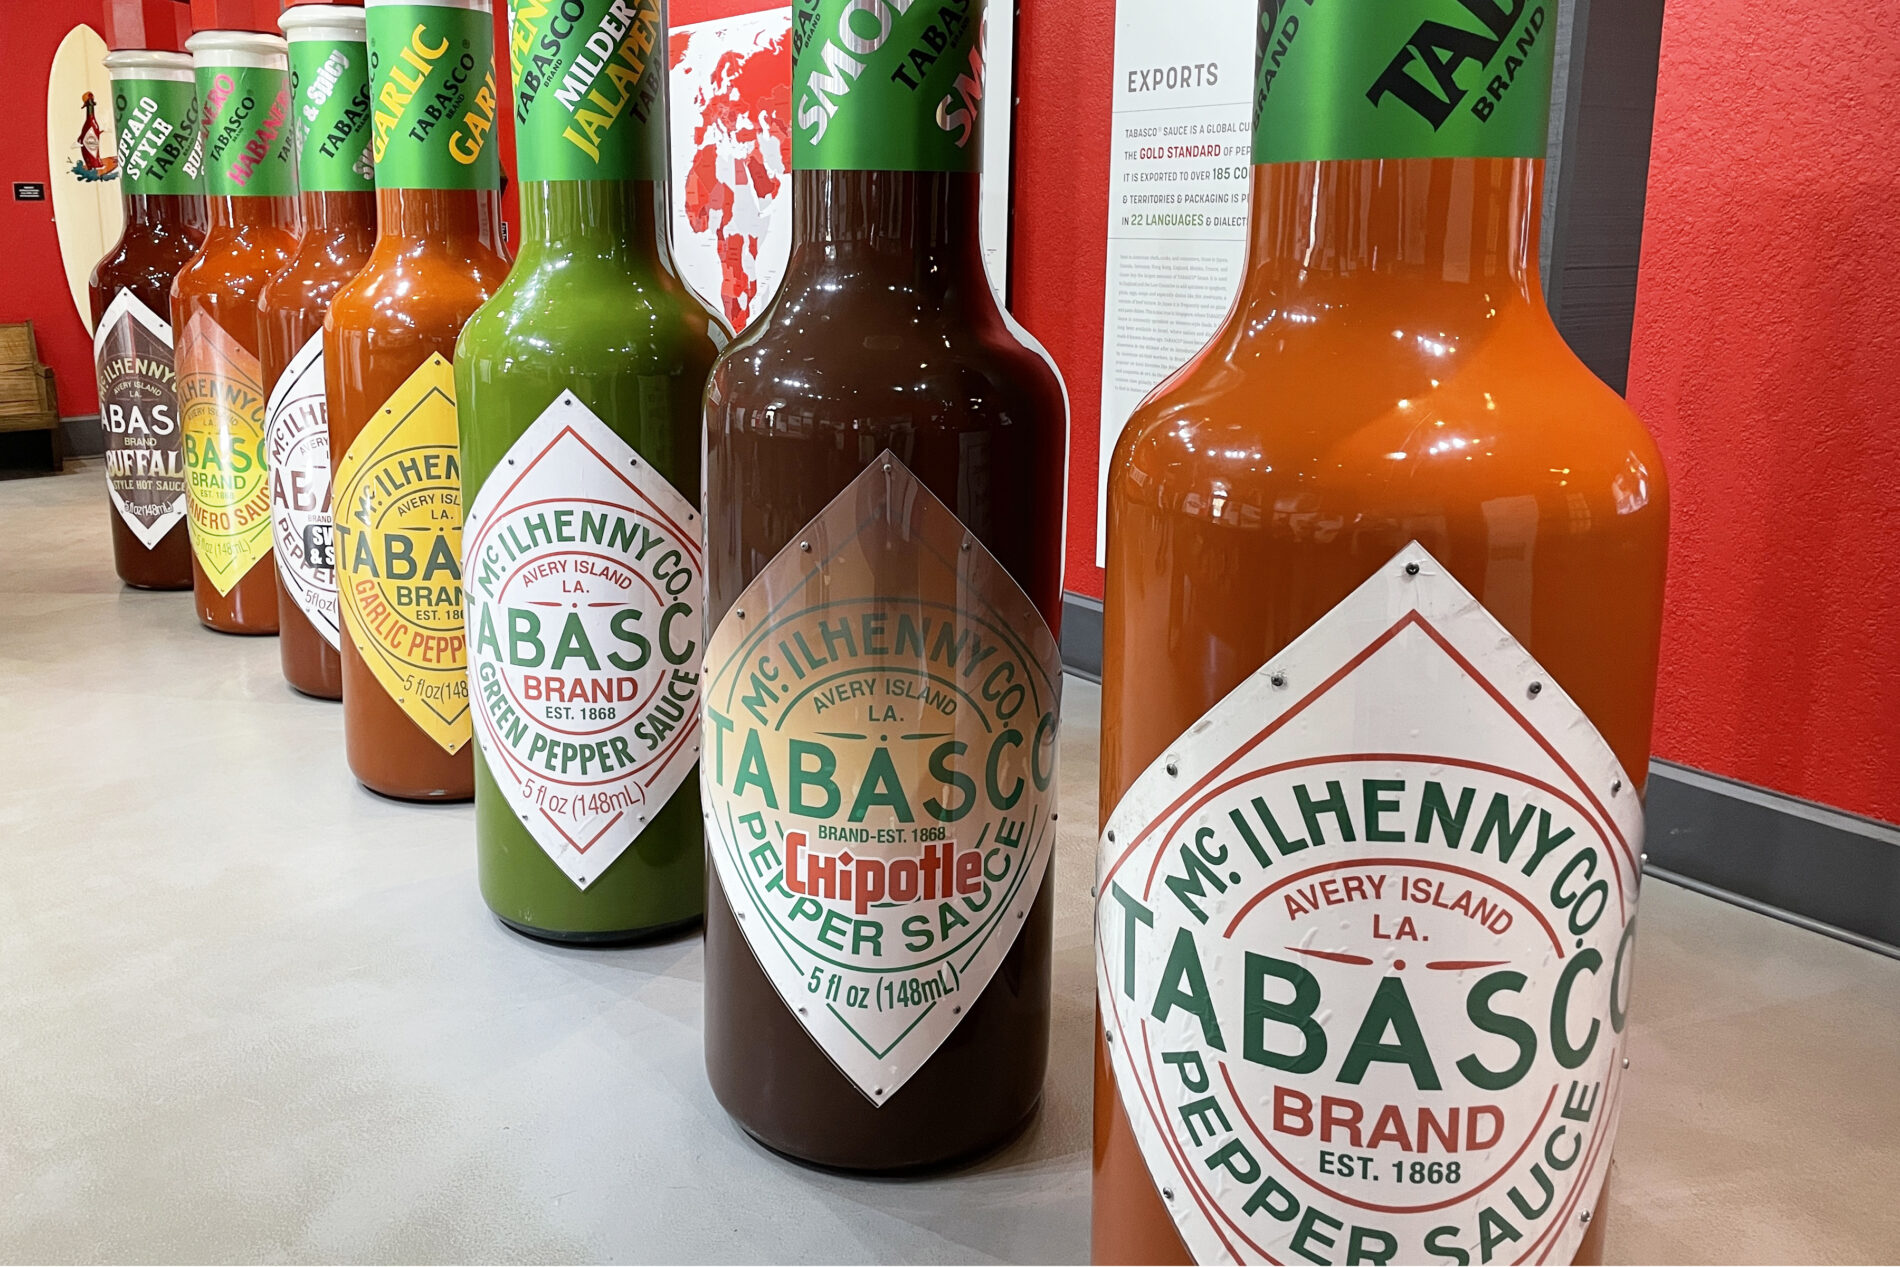 A Tabasco Factory display with a row of seven human-size bottles representing each of the seven Tabasco flavors.